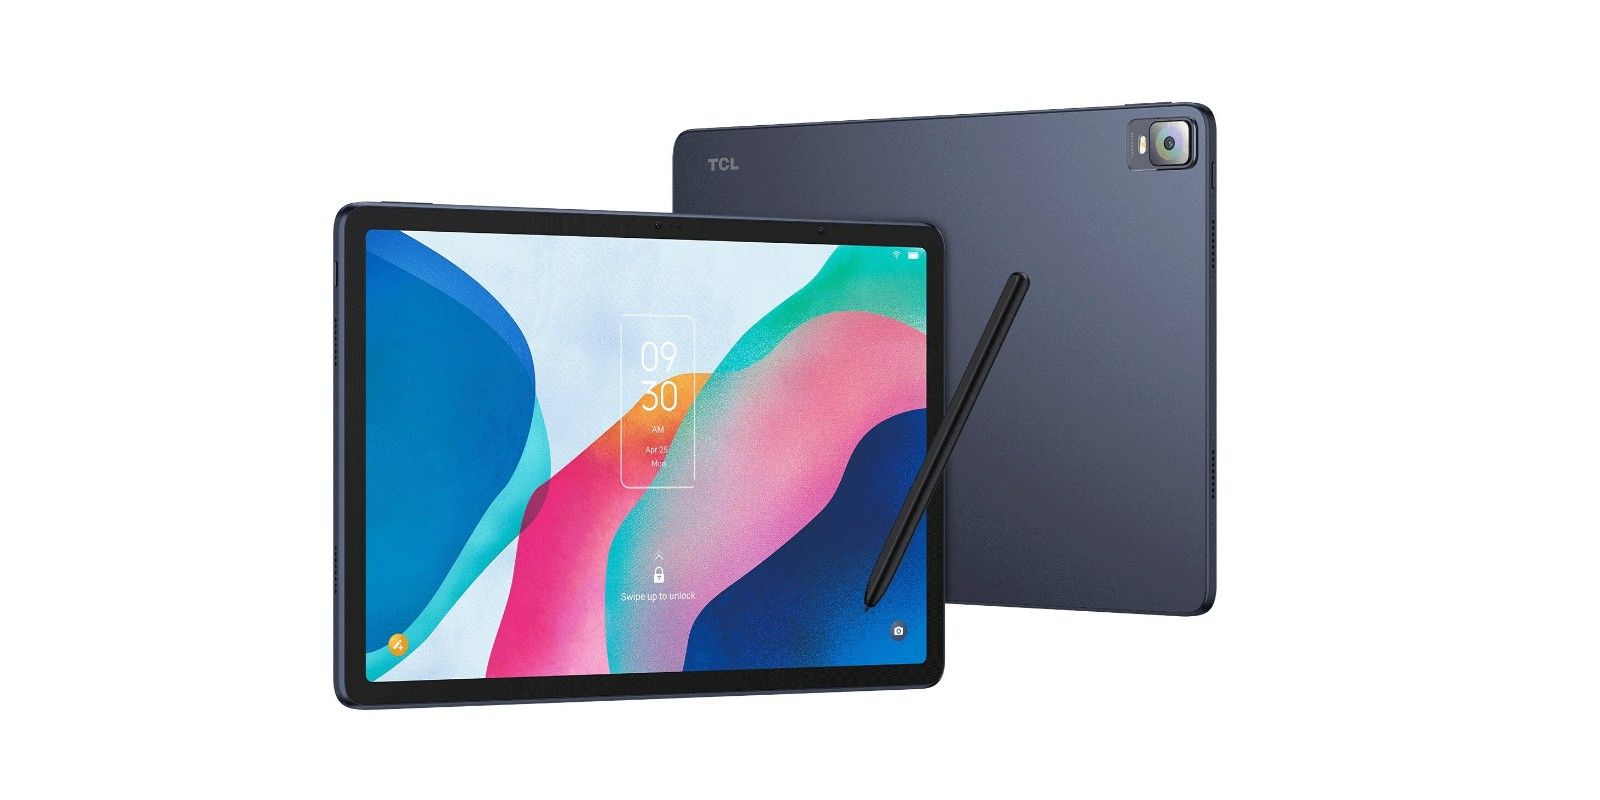 Image showing both sides of the TCL NXTPAPER 12 Pro and its stylus